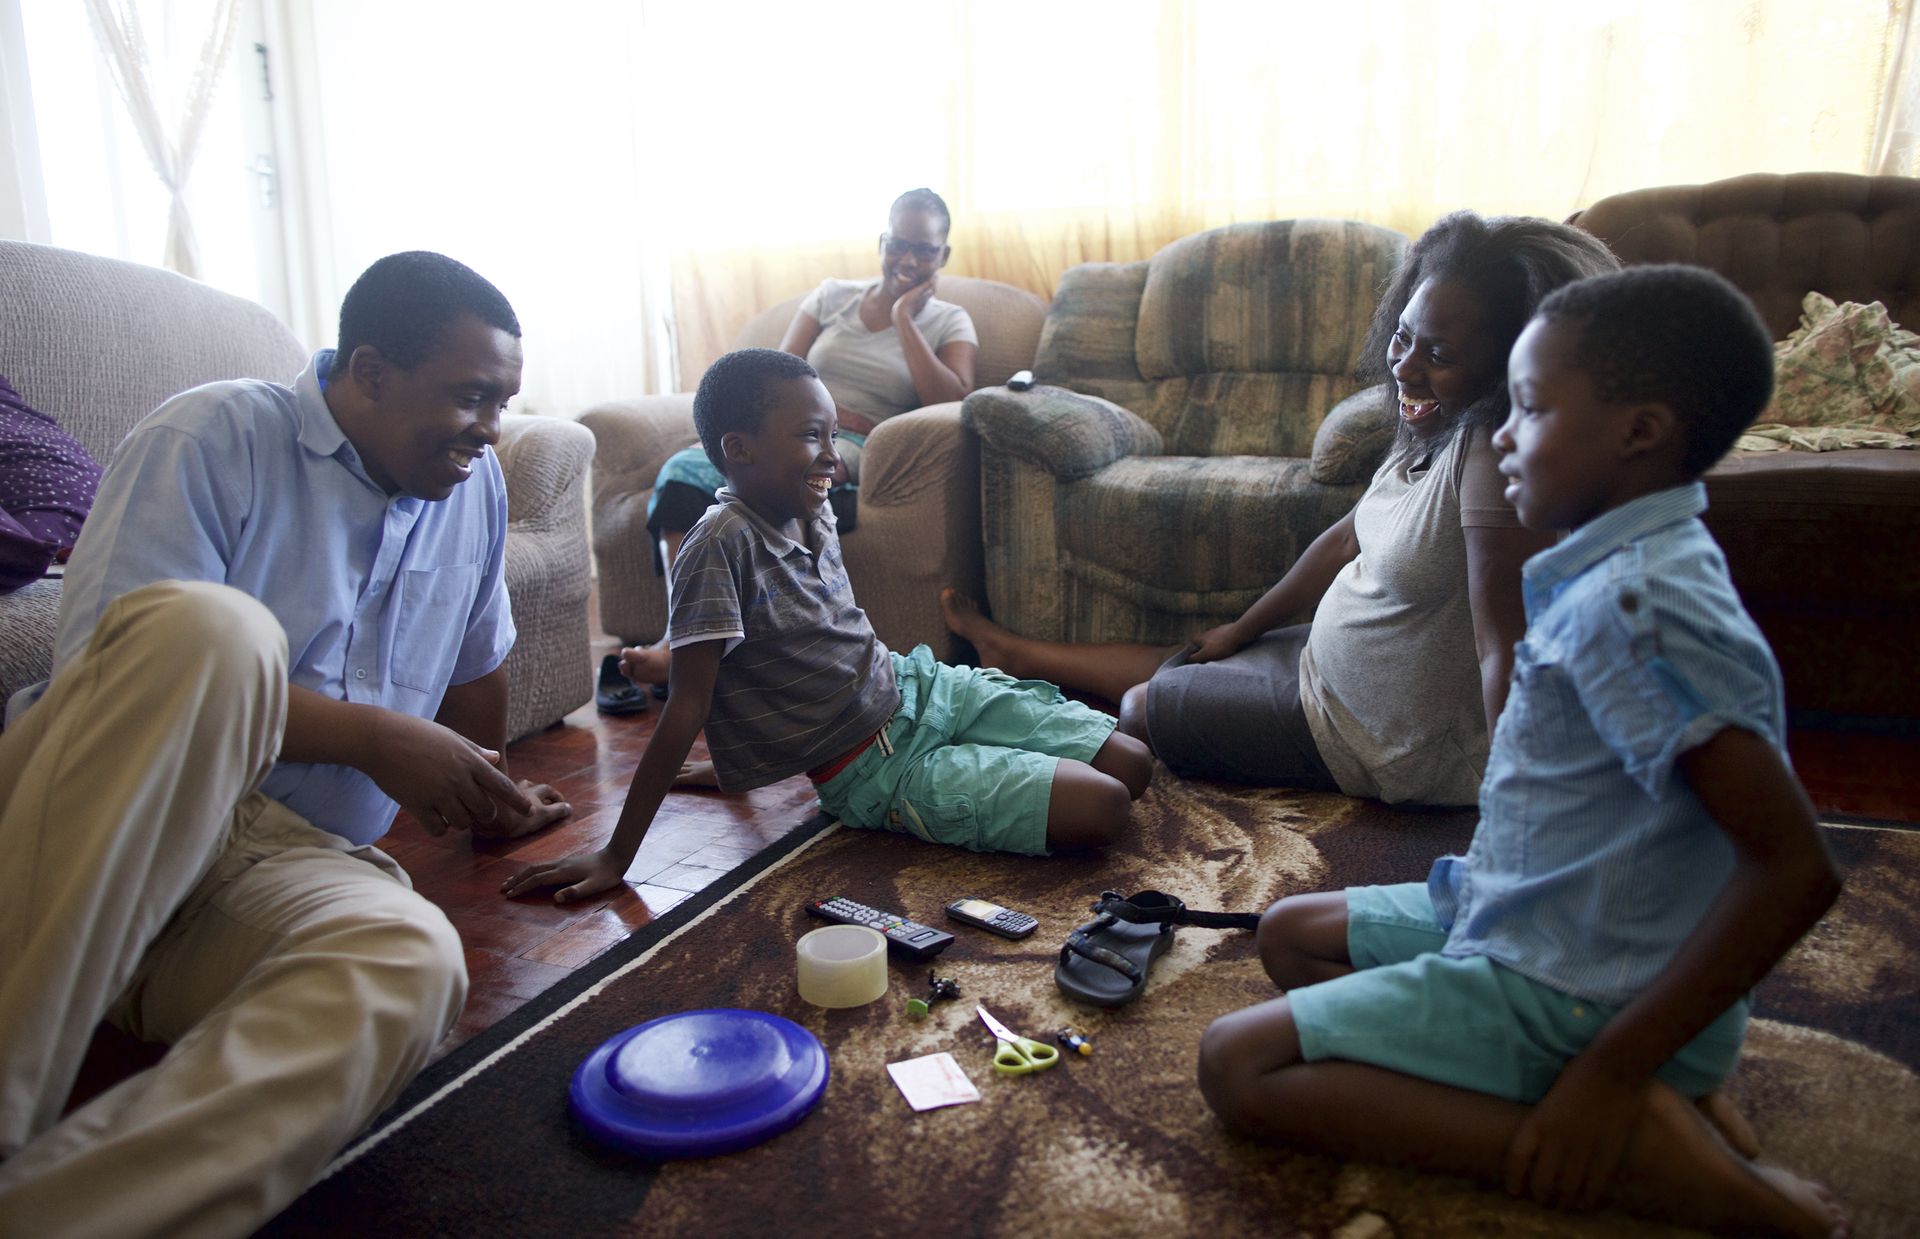 South Africa.  Family spending time together playing a memory game.  Boy about to guess what is missing.